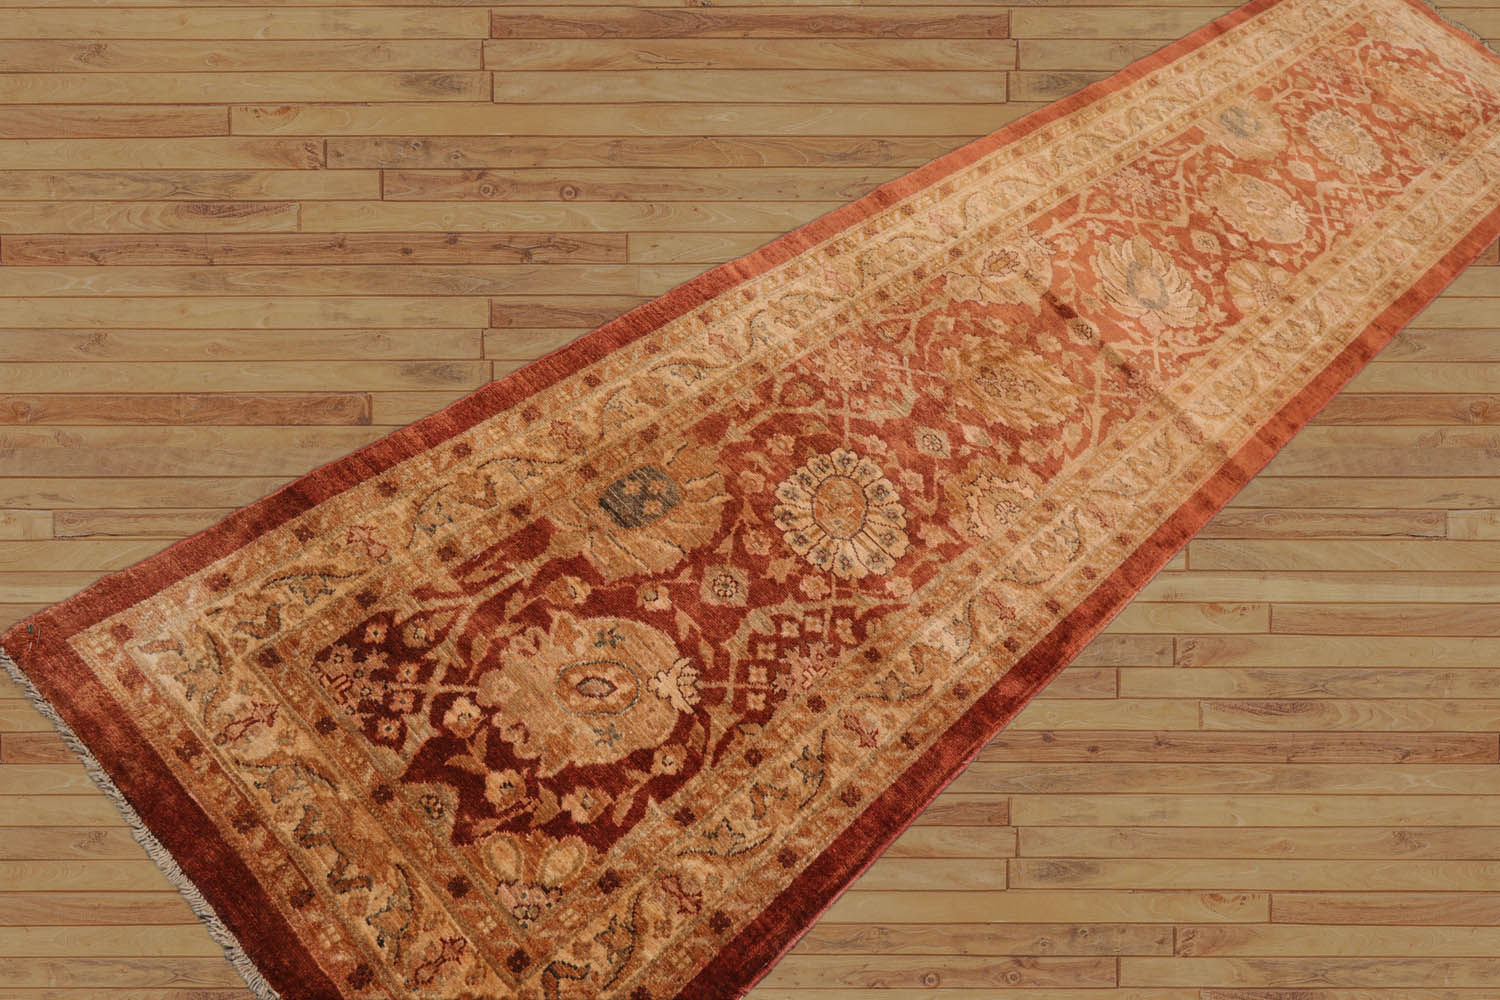 Boddie Runner Hand Knotted 100% Wool Chobi Peshawar Traditional Oriental Area Rug Pale Terracotta, Beige Color